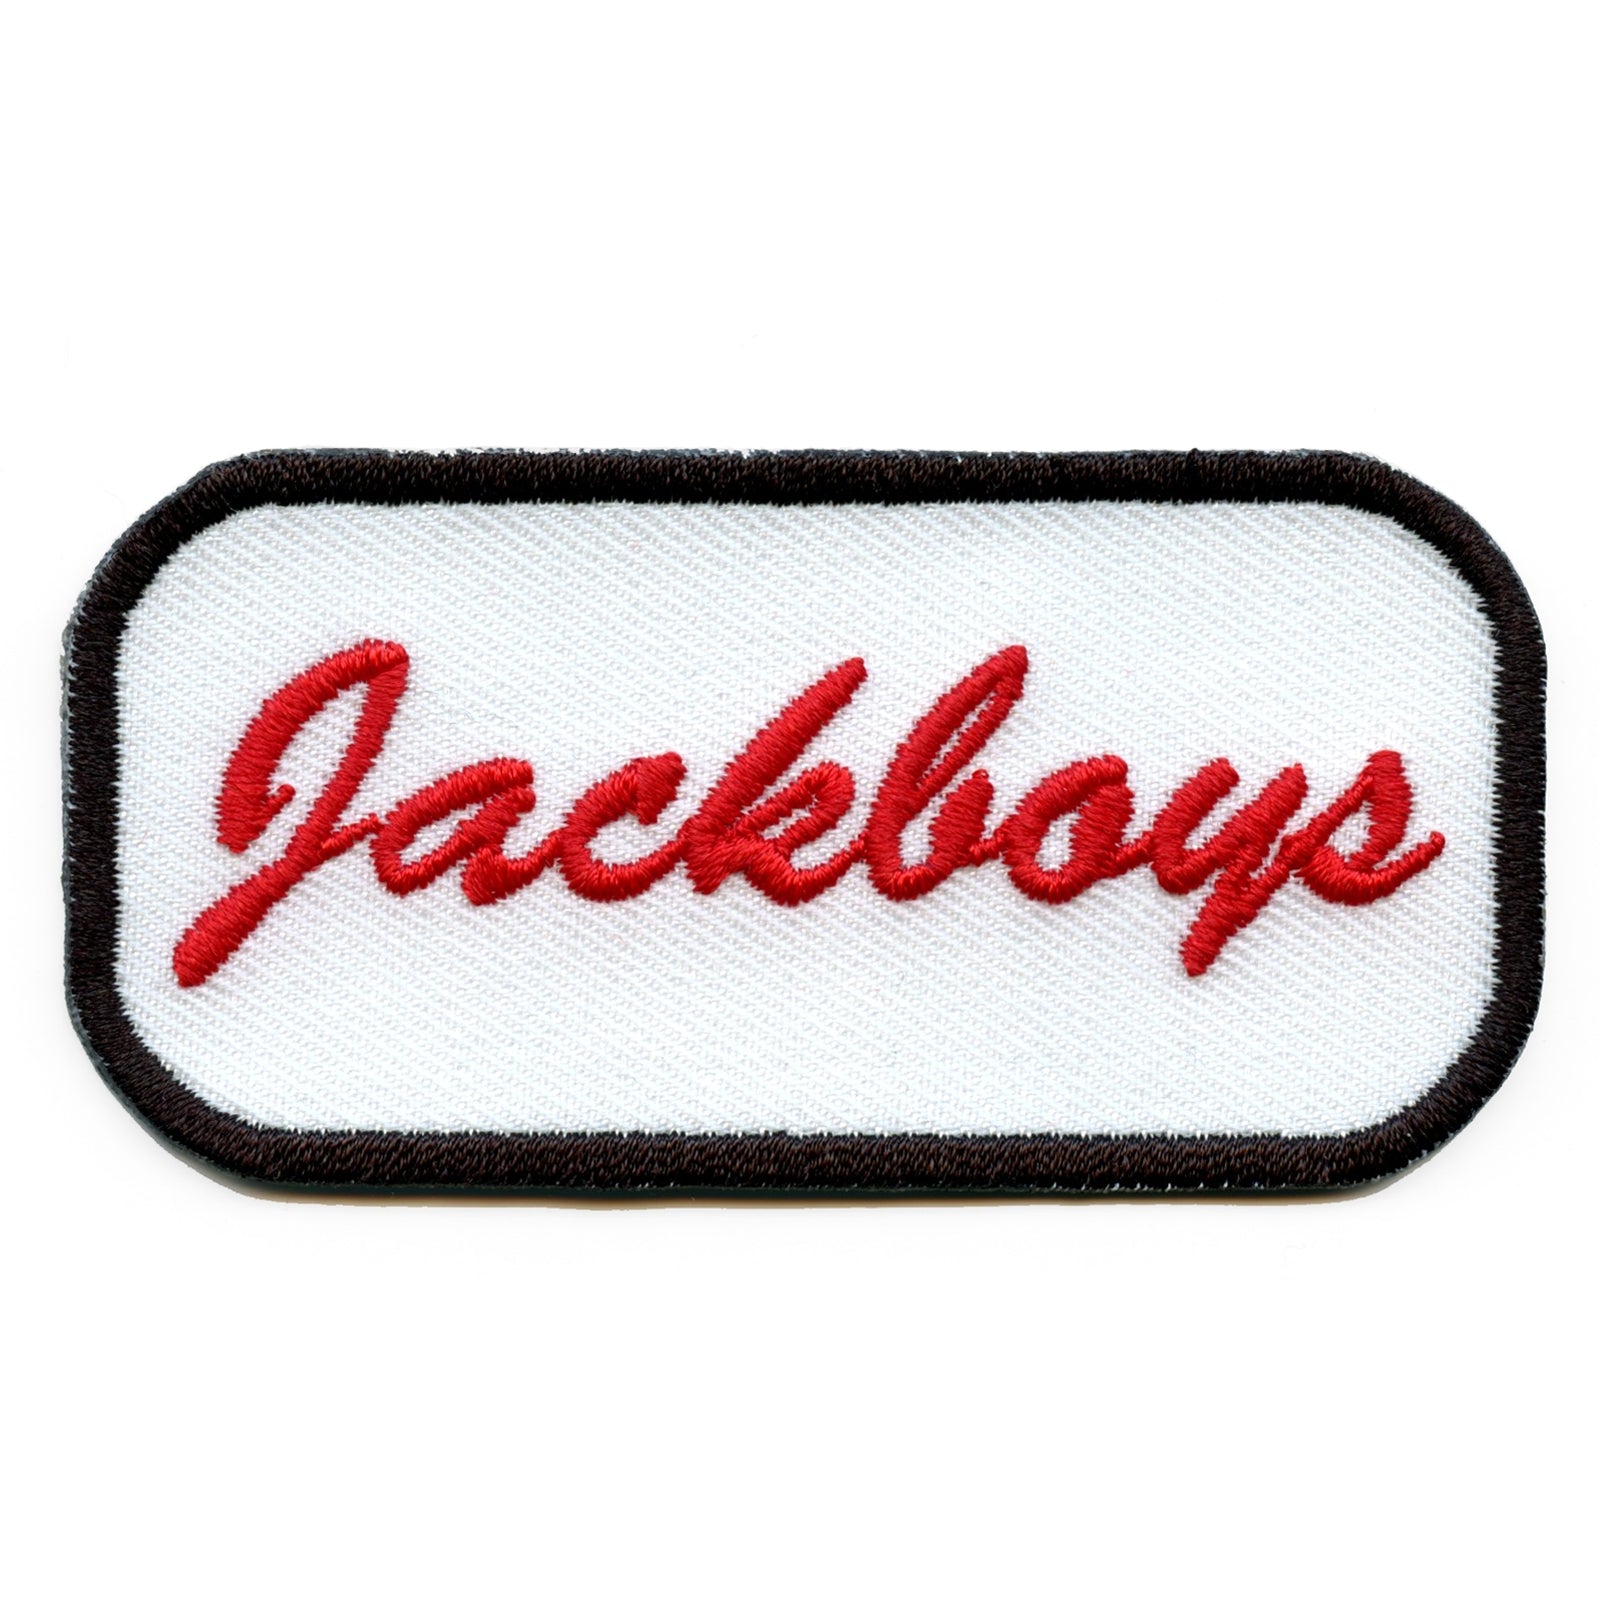 Jackboys Mechanic Nametag Iron On Embroidered Patch 